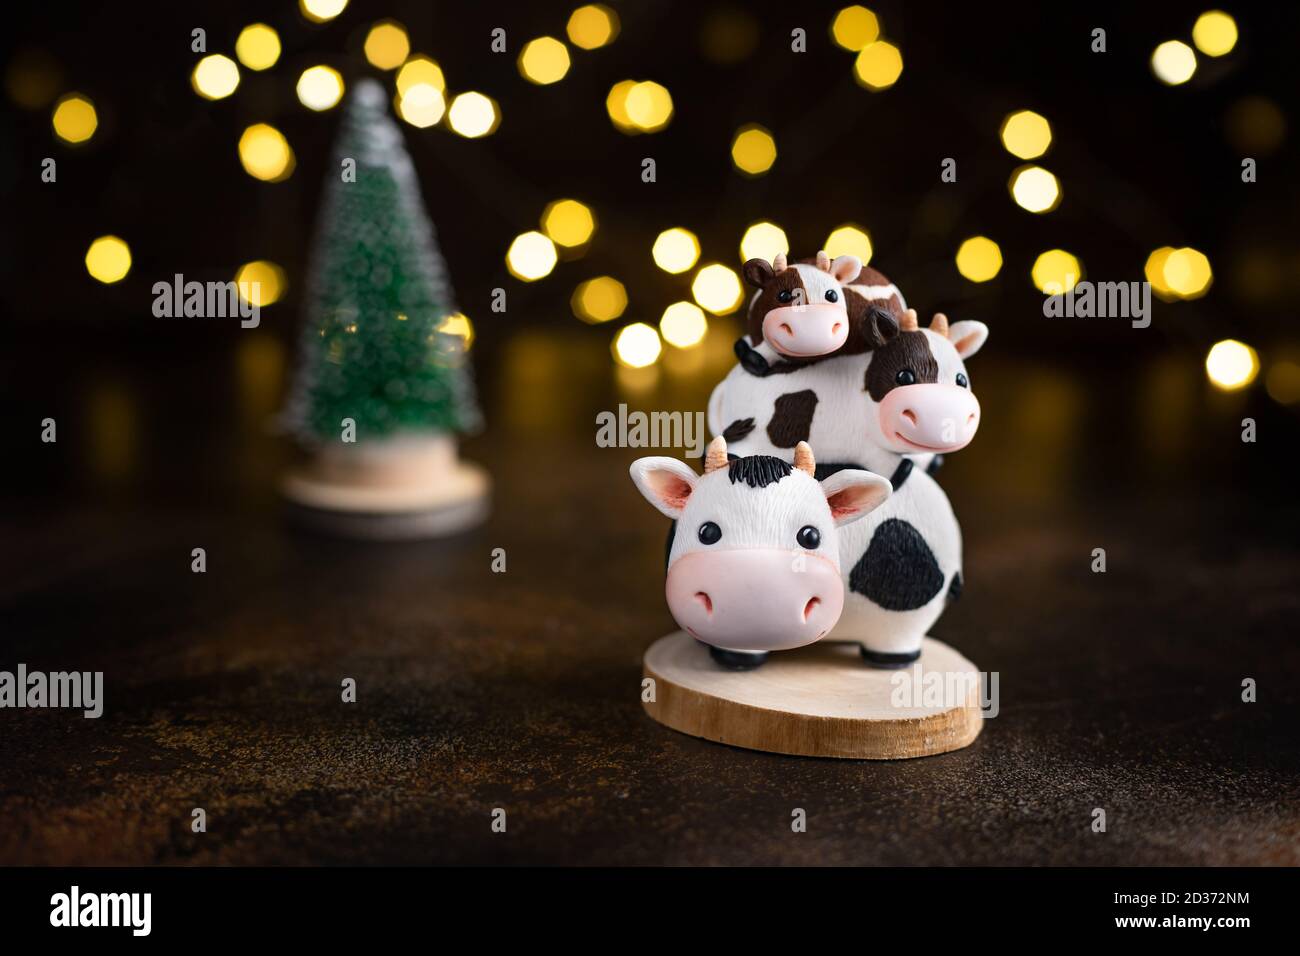 family of bulls on the background of a Christmas tree and Christmas lights. Stock Photo